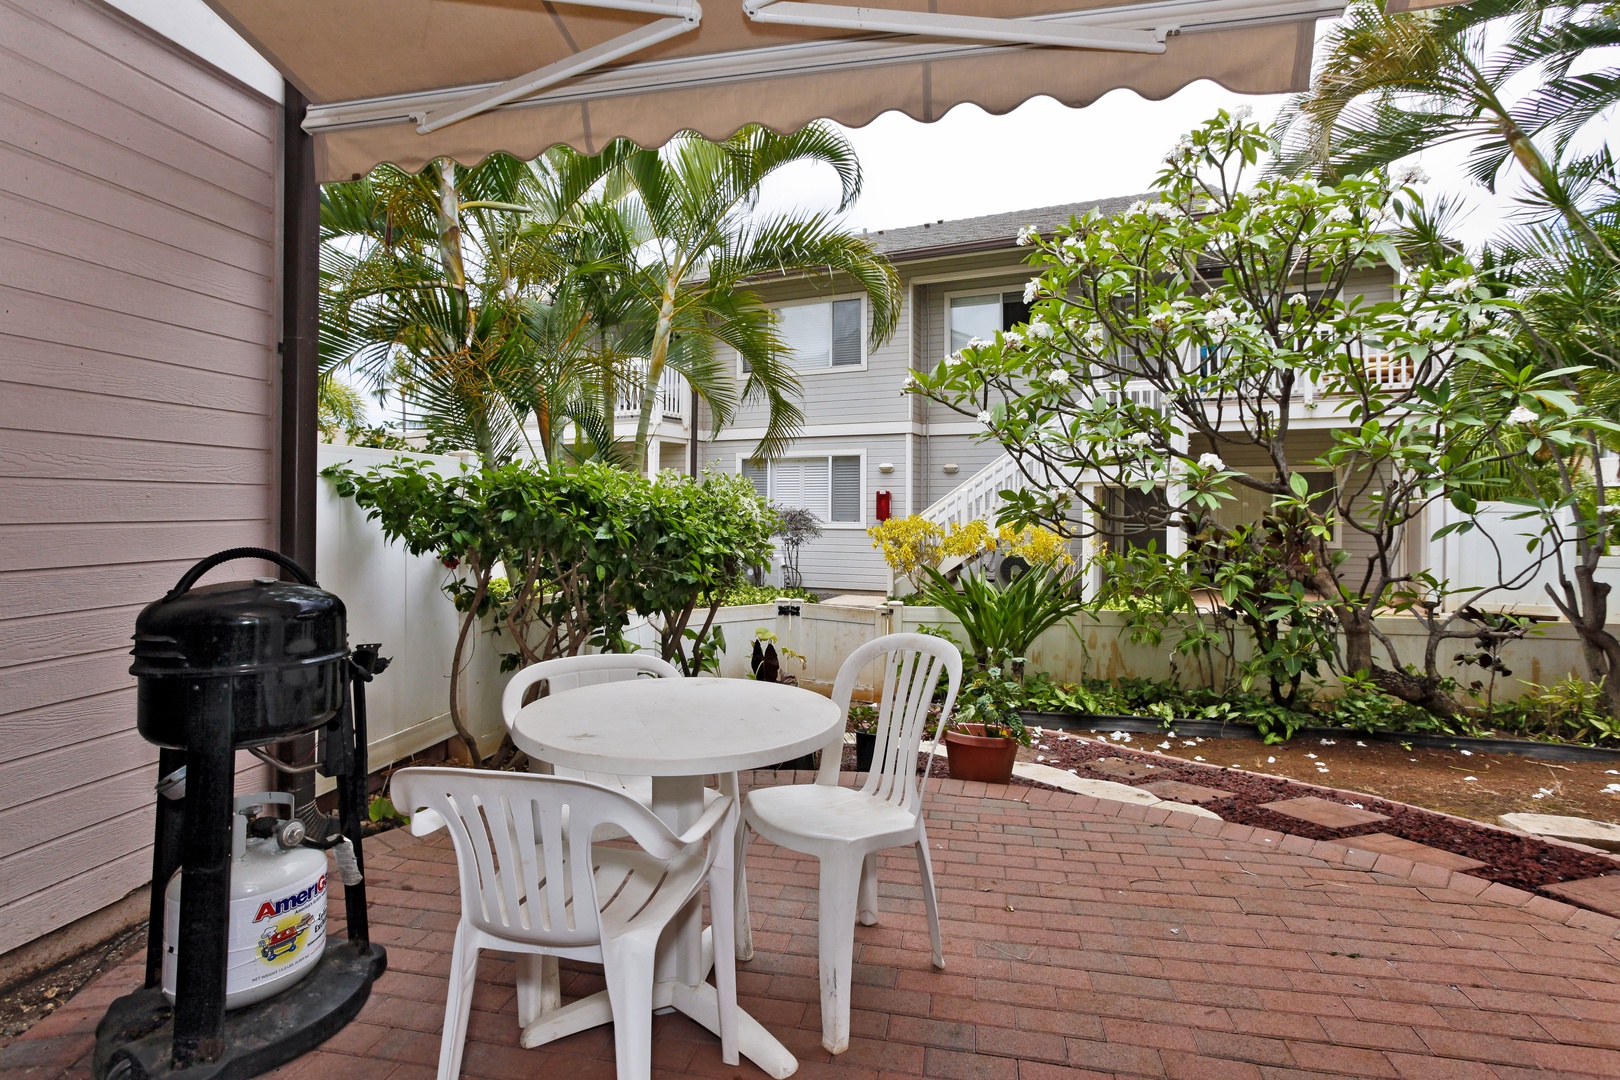 Kapolei Vacation Rentals, Fairways at Ko Olina 33F - The tranquil lanai where you can dine al fresco and grill surrounded by lush greenery.